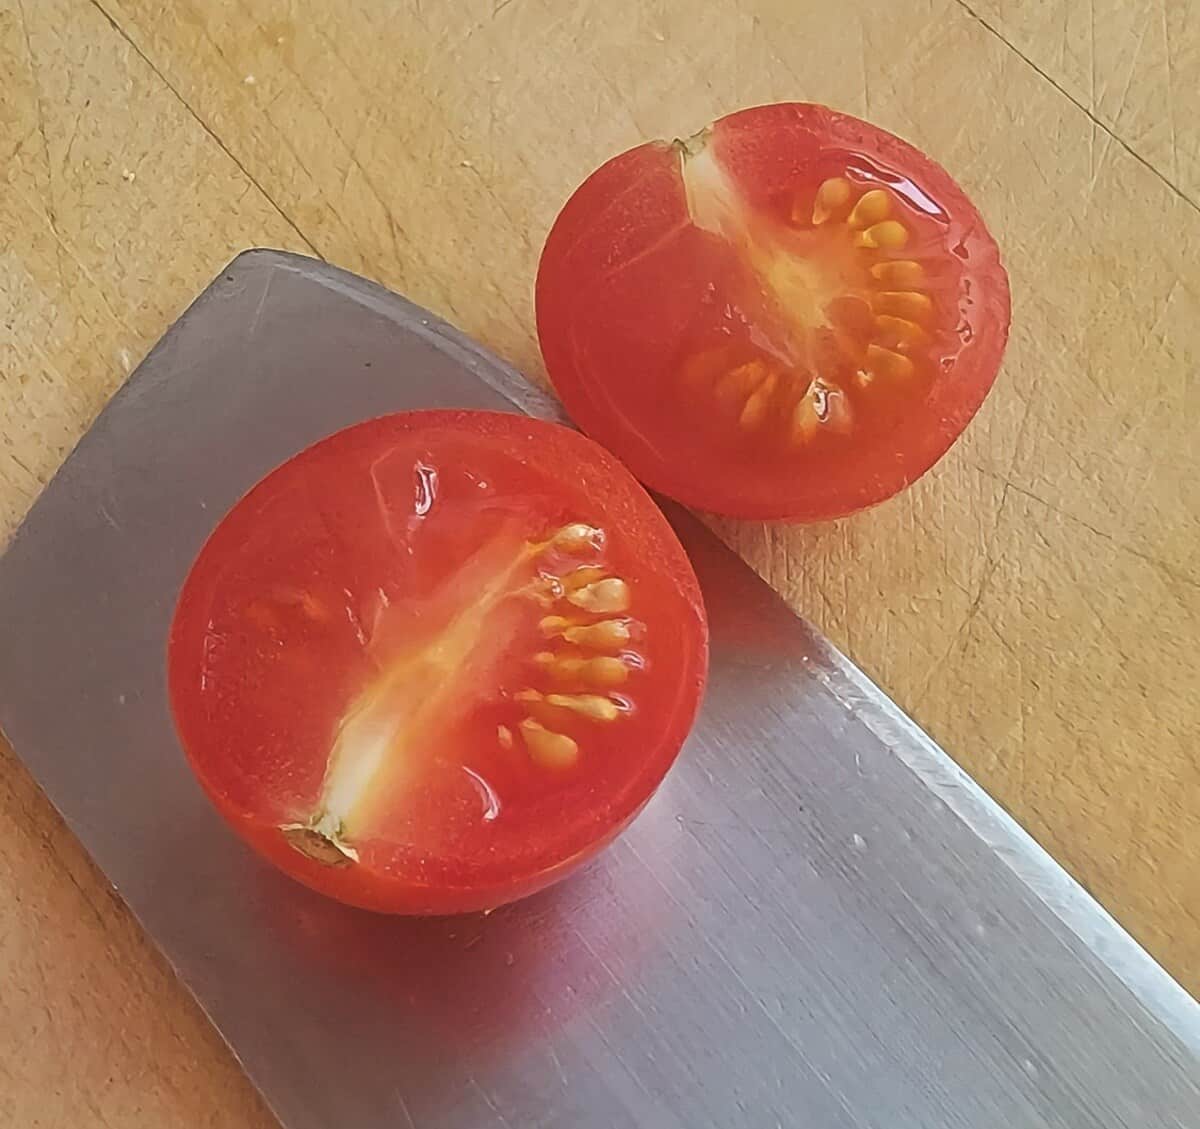 a single cherry tomato cut in half on a cutting board with a knife